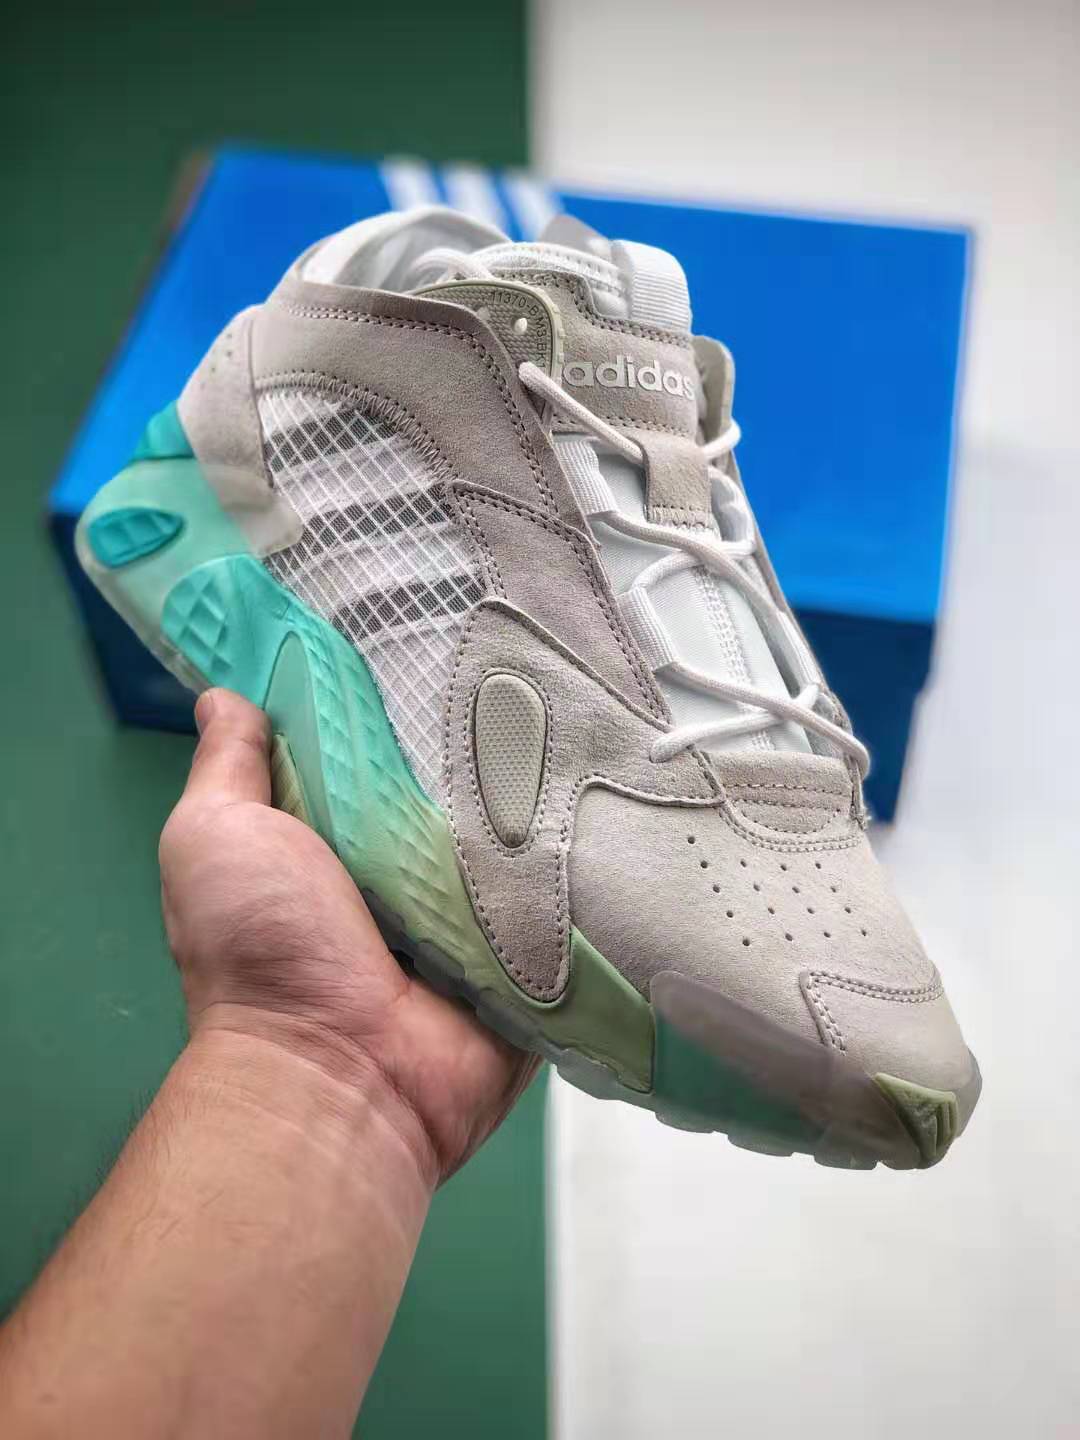 Adidas Streetball Glow Green EF1908 - Stand Out with These Vibrant Sneakers